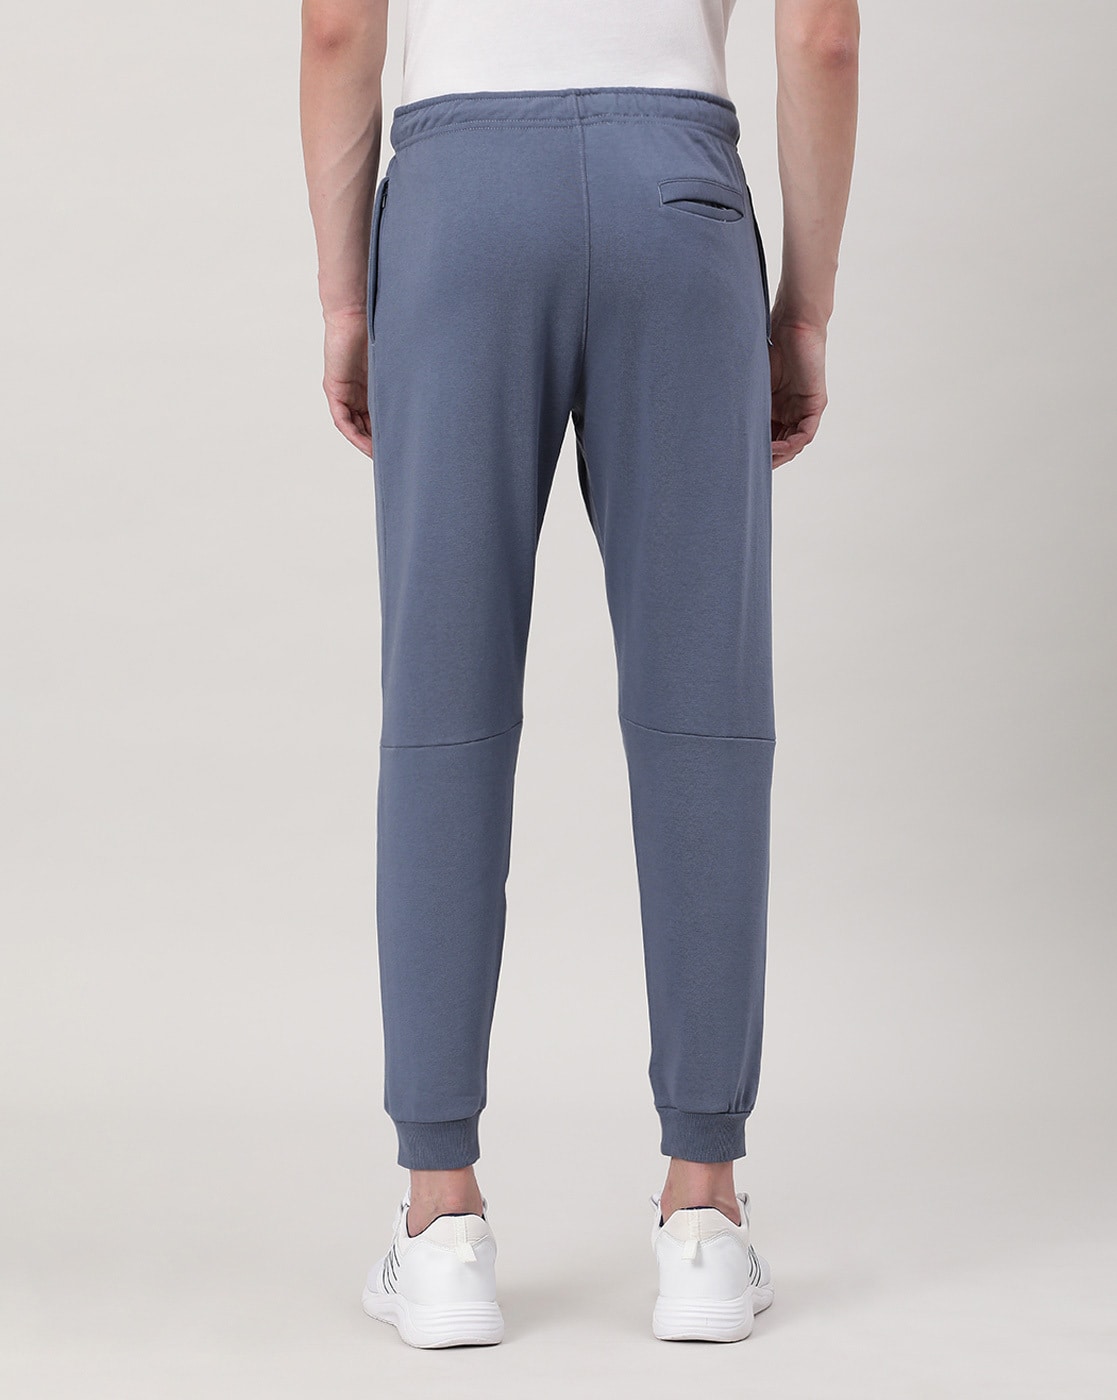 Buy Crocodile Trousers online  Men  88 products  FASHIOLAin